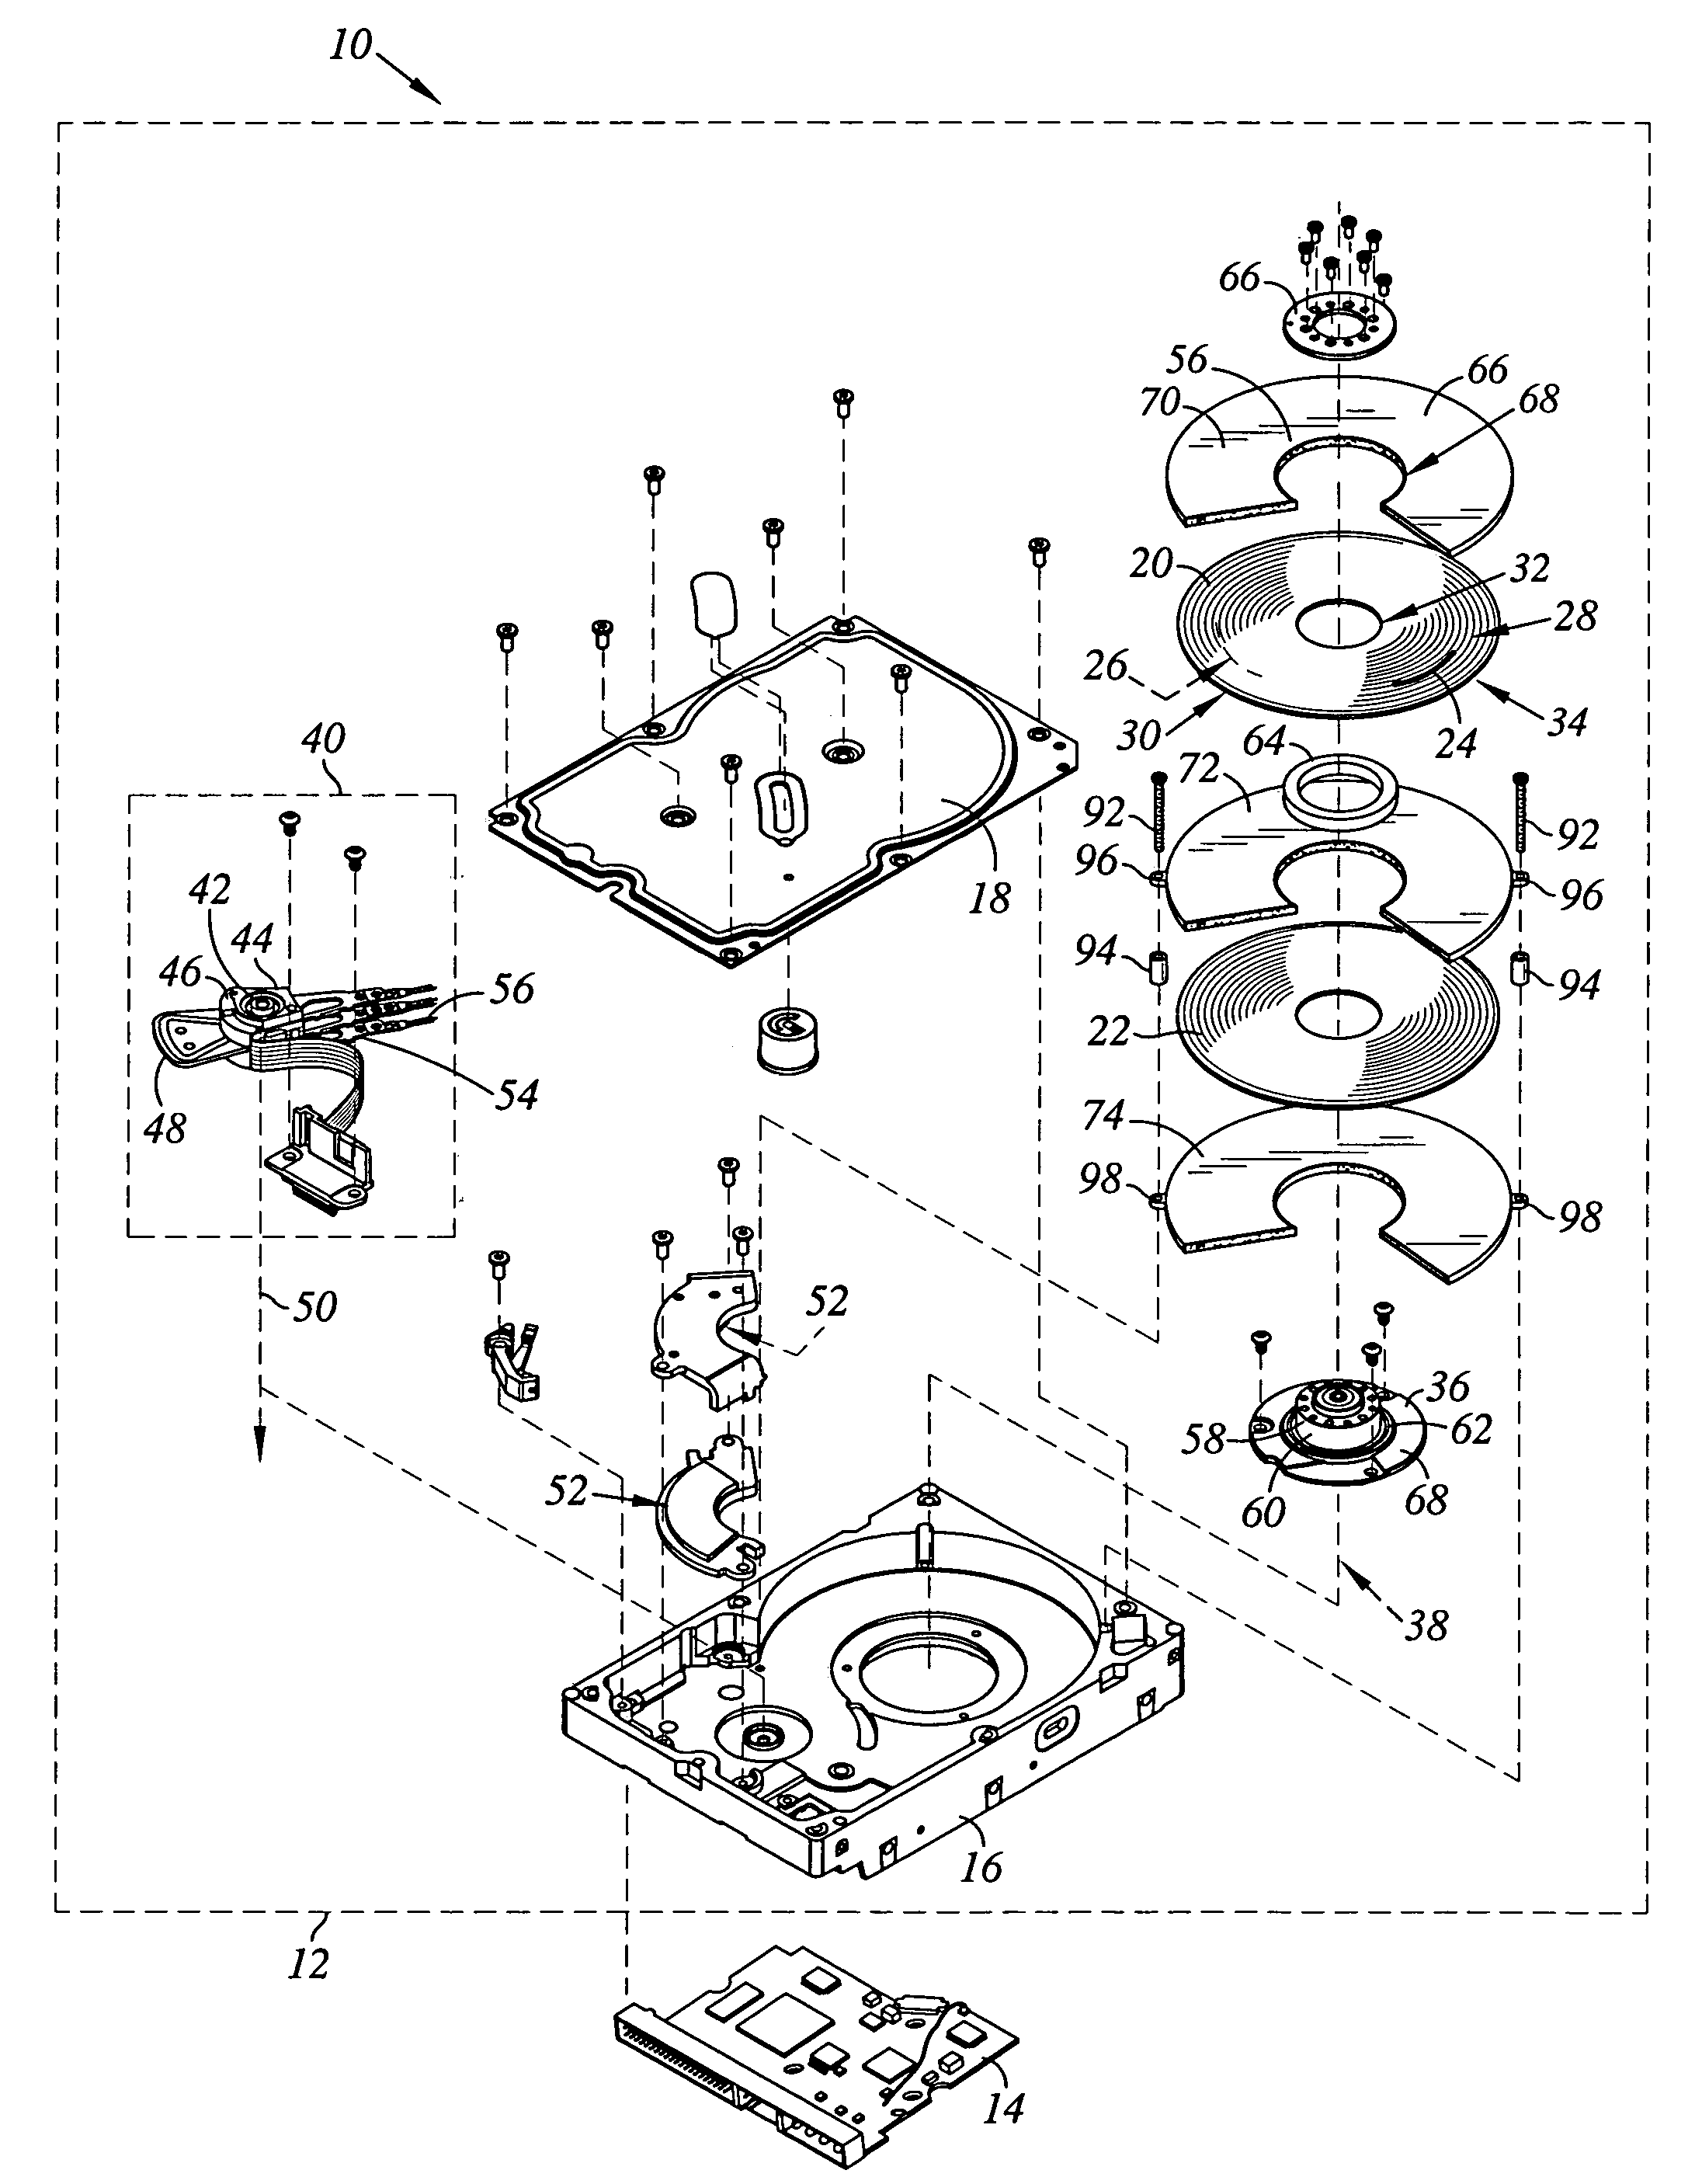 Disk drive with airflow channeling enclosure